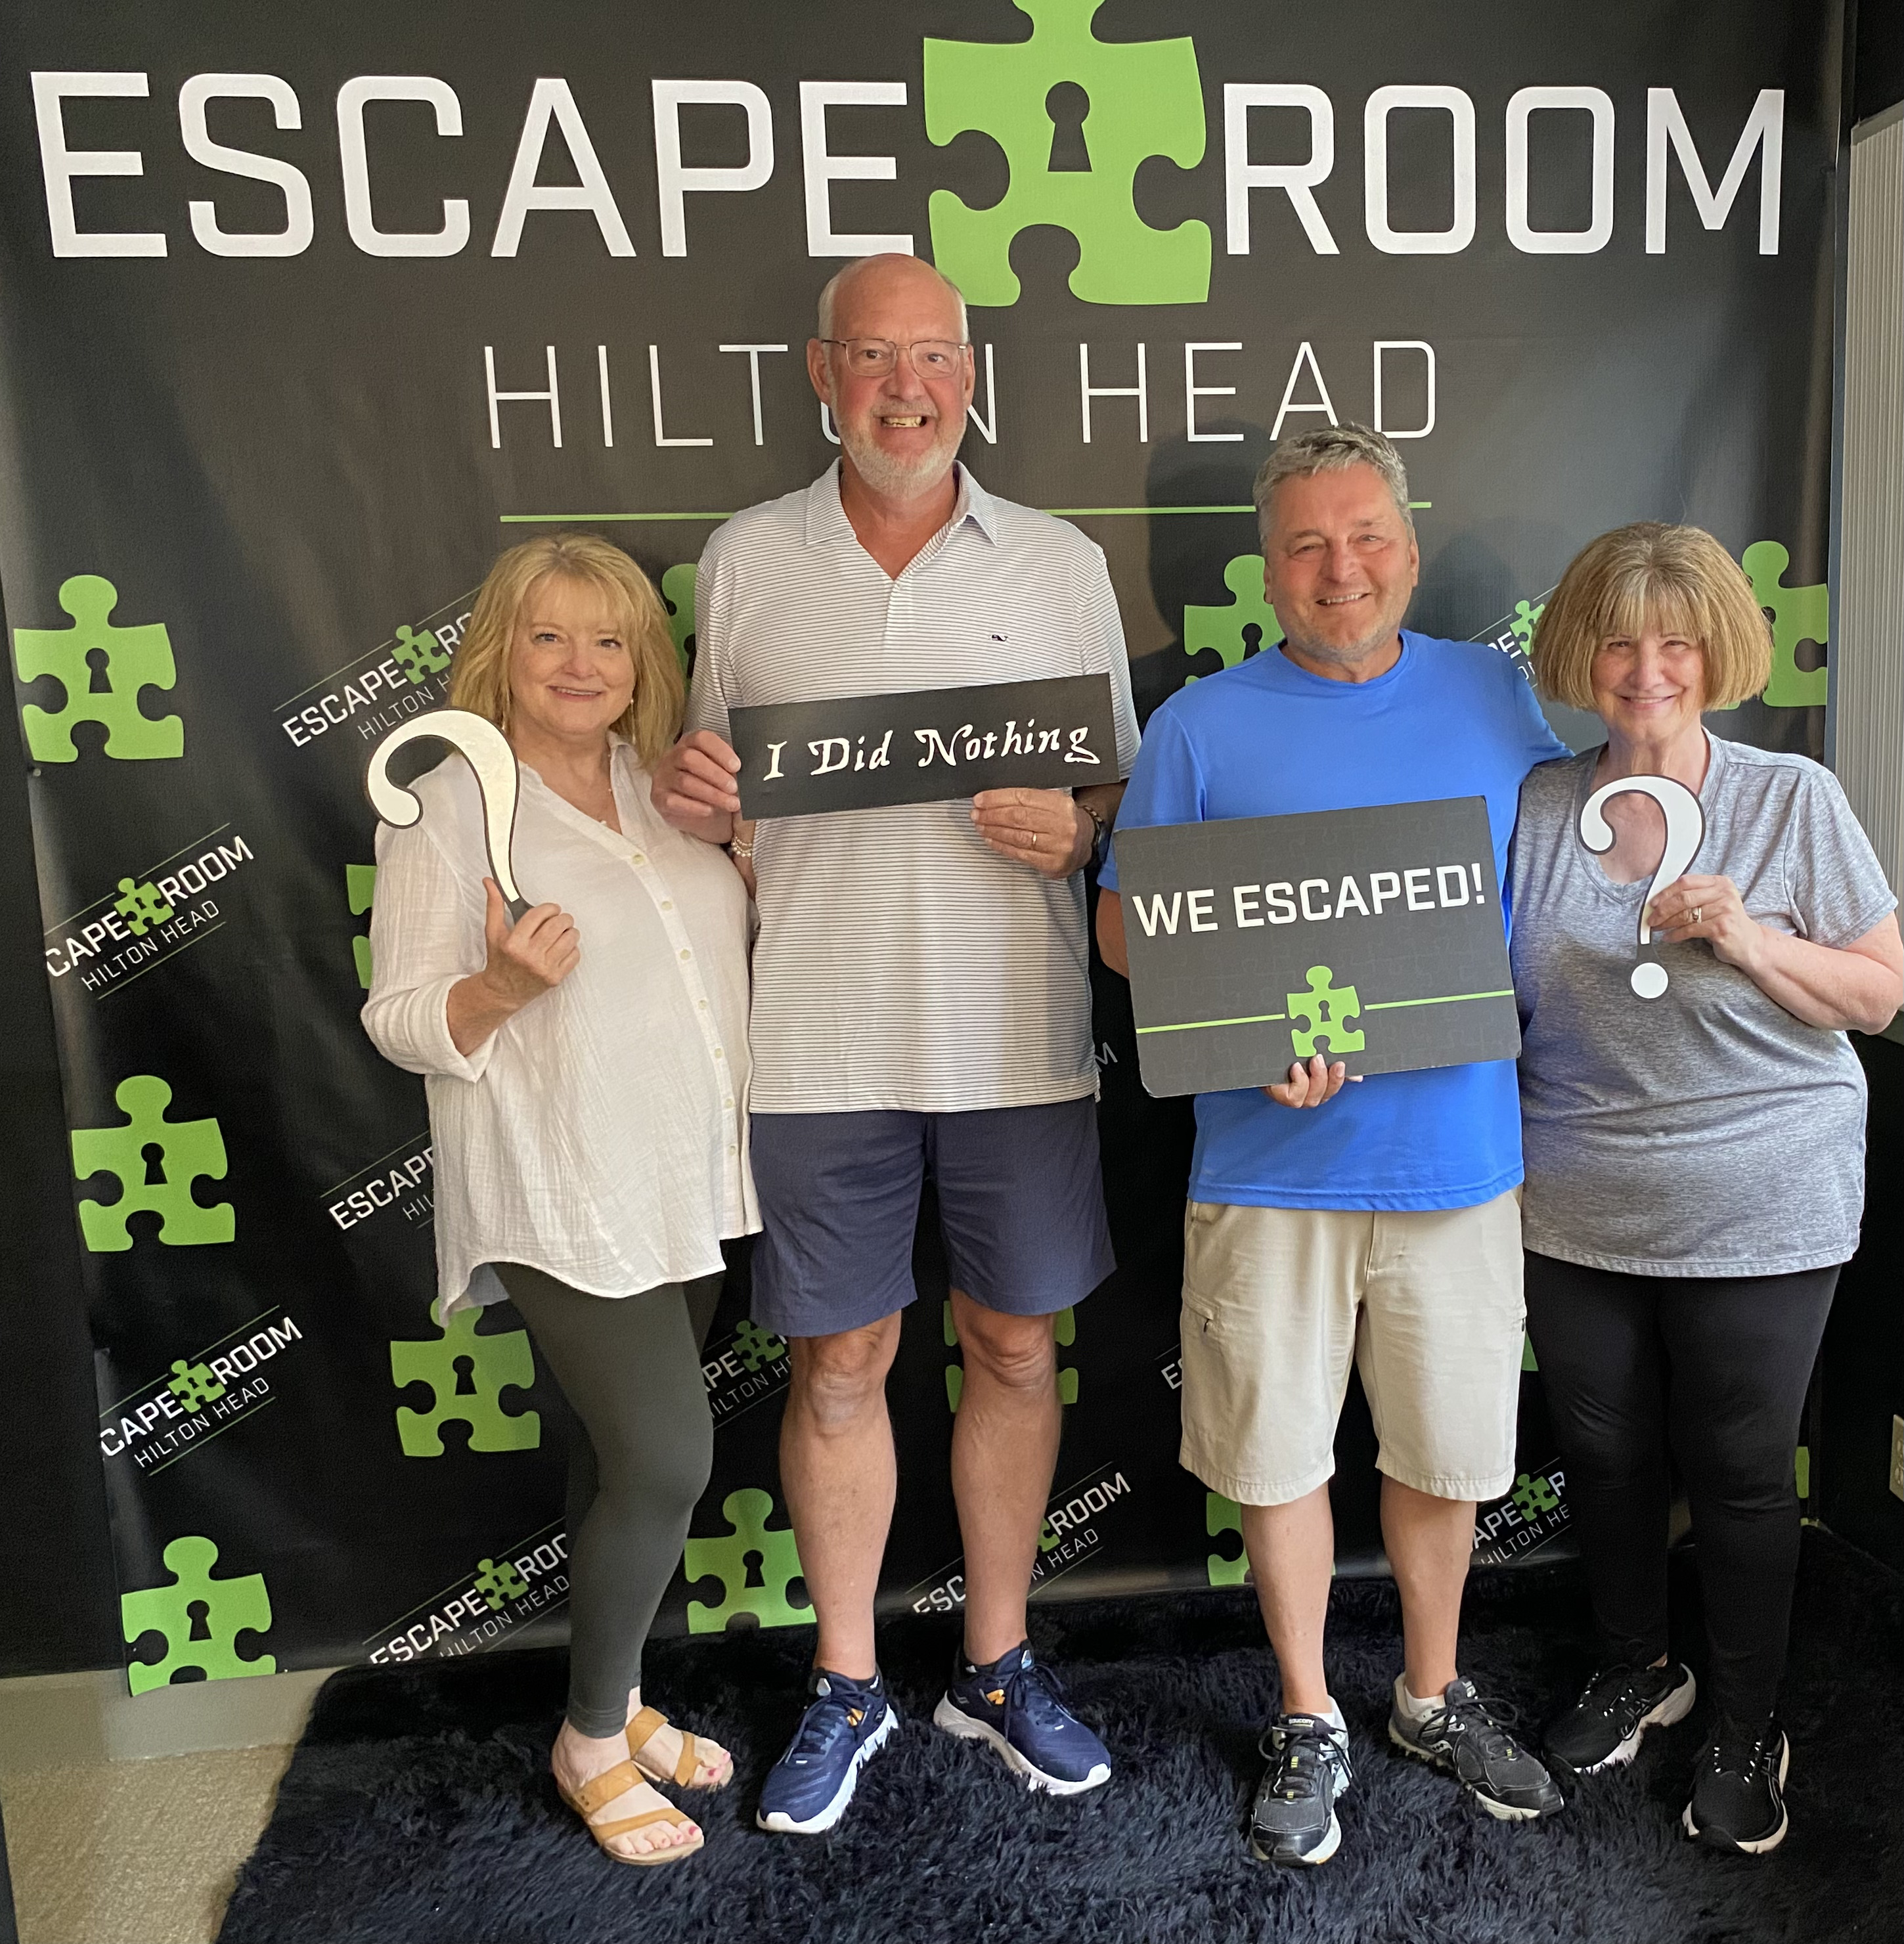 My wife and I and her sister and her husband recently stayed at the Hilton Head Beach Club.   We had a wonderful time in HIlton Head, including trips to the beach, pool, and many HH restaurants.  But one of our most enjoyable times was a trip to the Hilton Head Escape Room which was within walking distance of our condominium.   As you can see, we made it out alive!